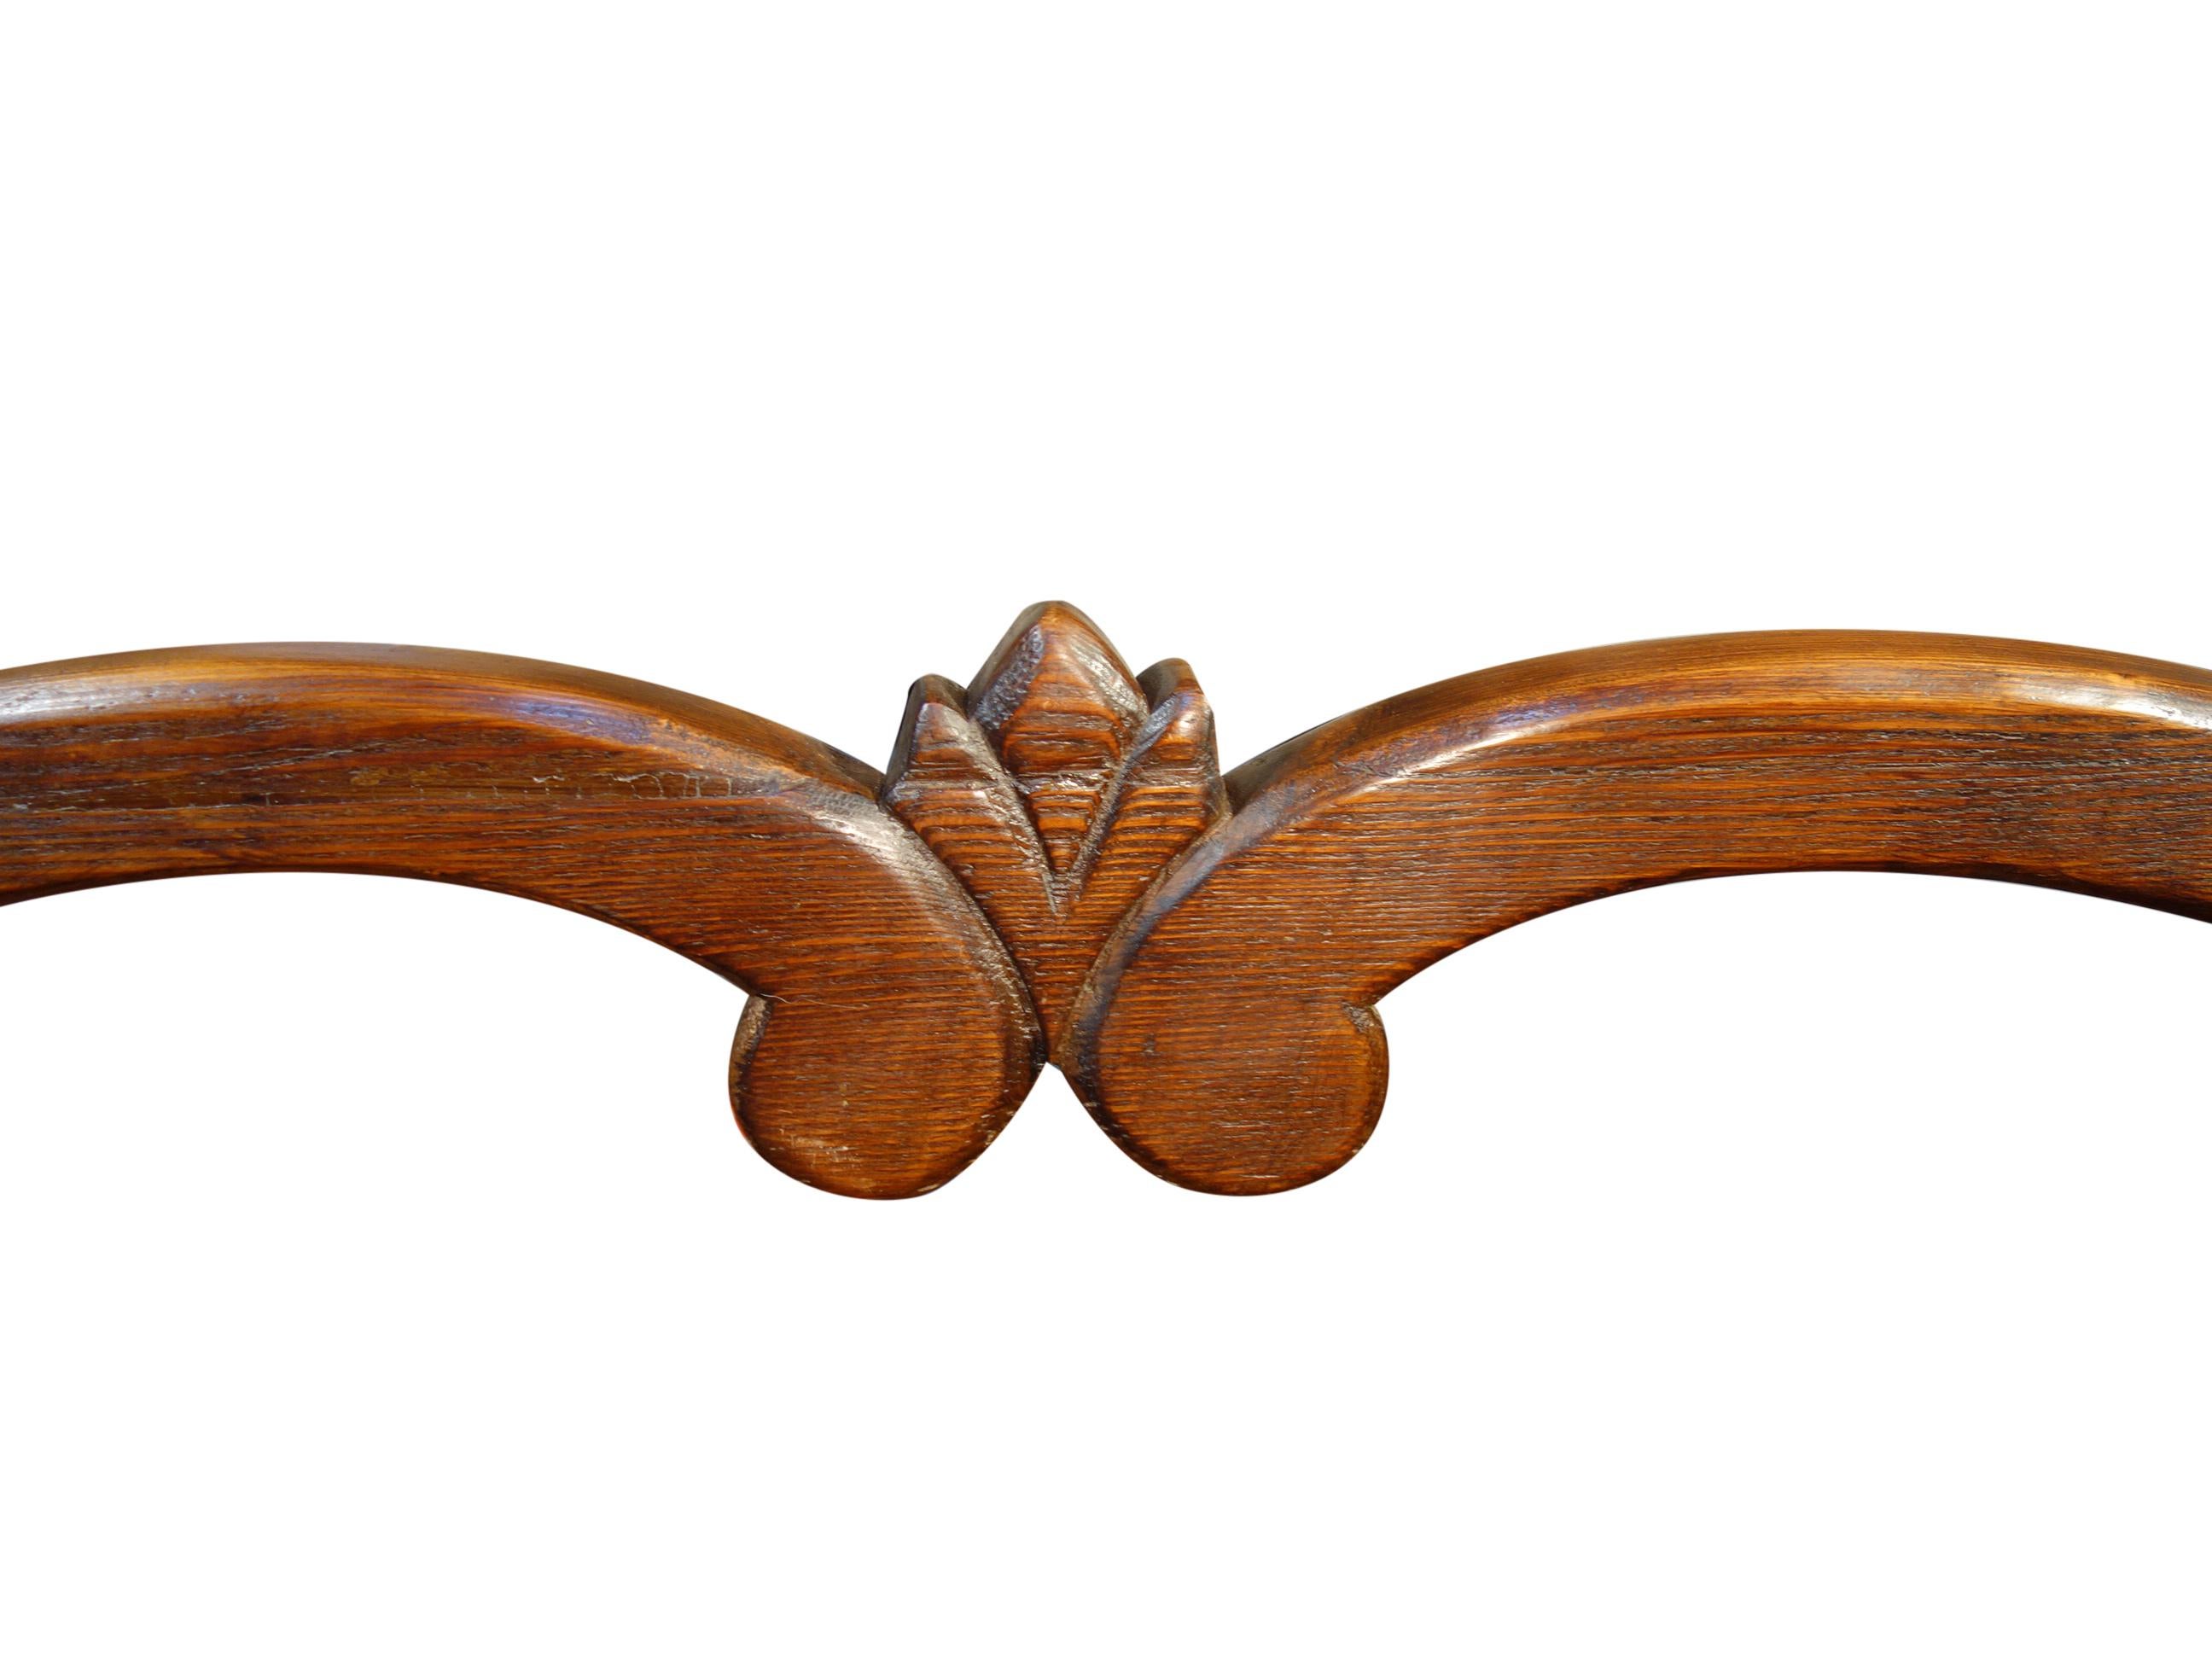 19th Century Italian Walnut Refectory Table with Carved Crosspiece Circa 1840 4